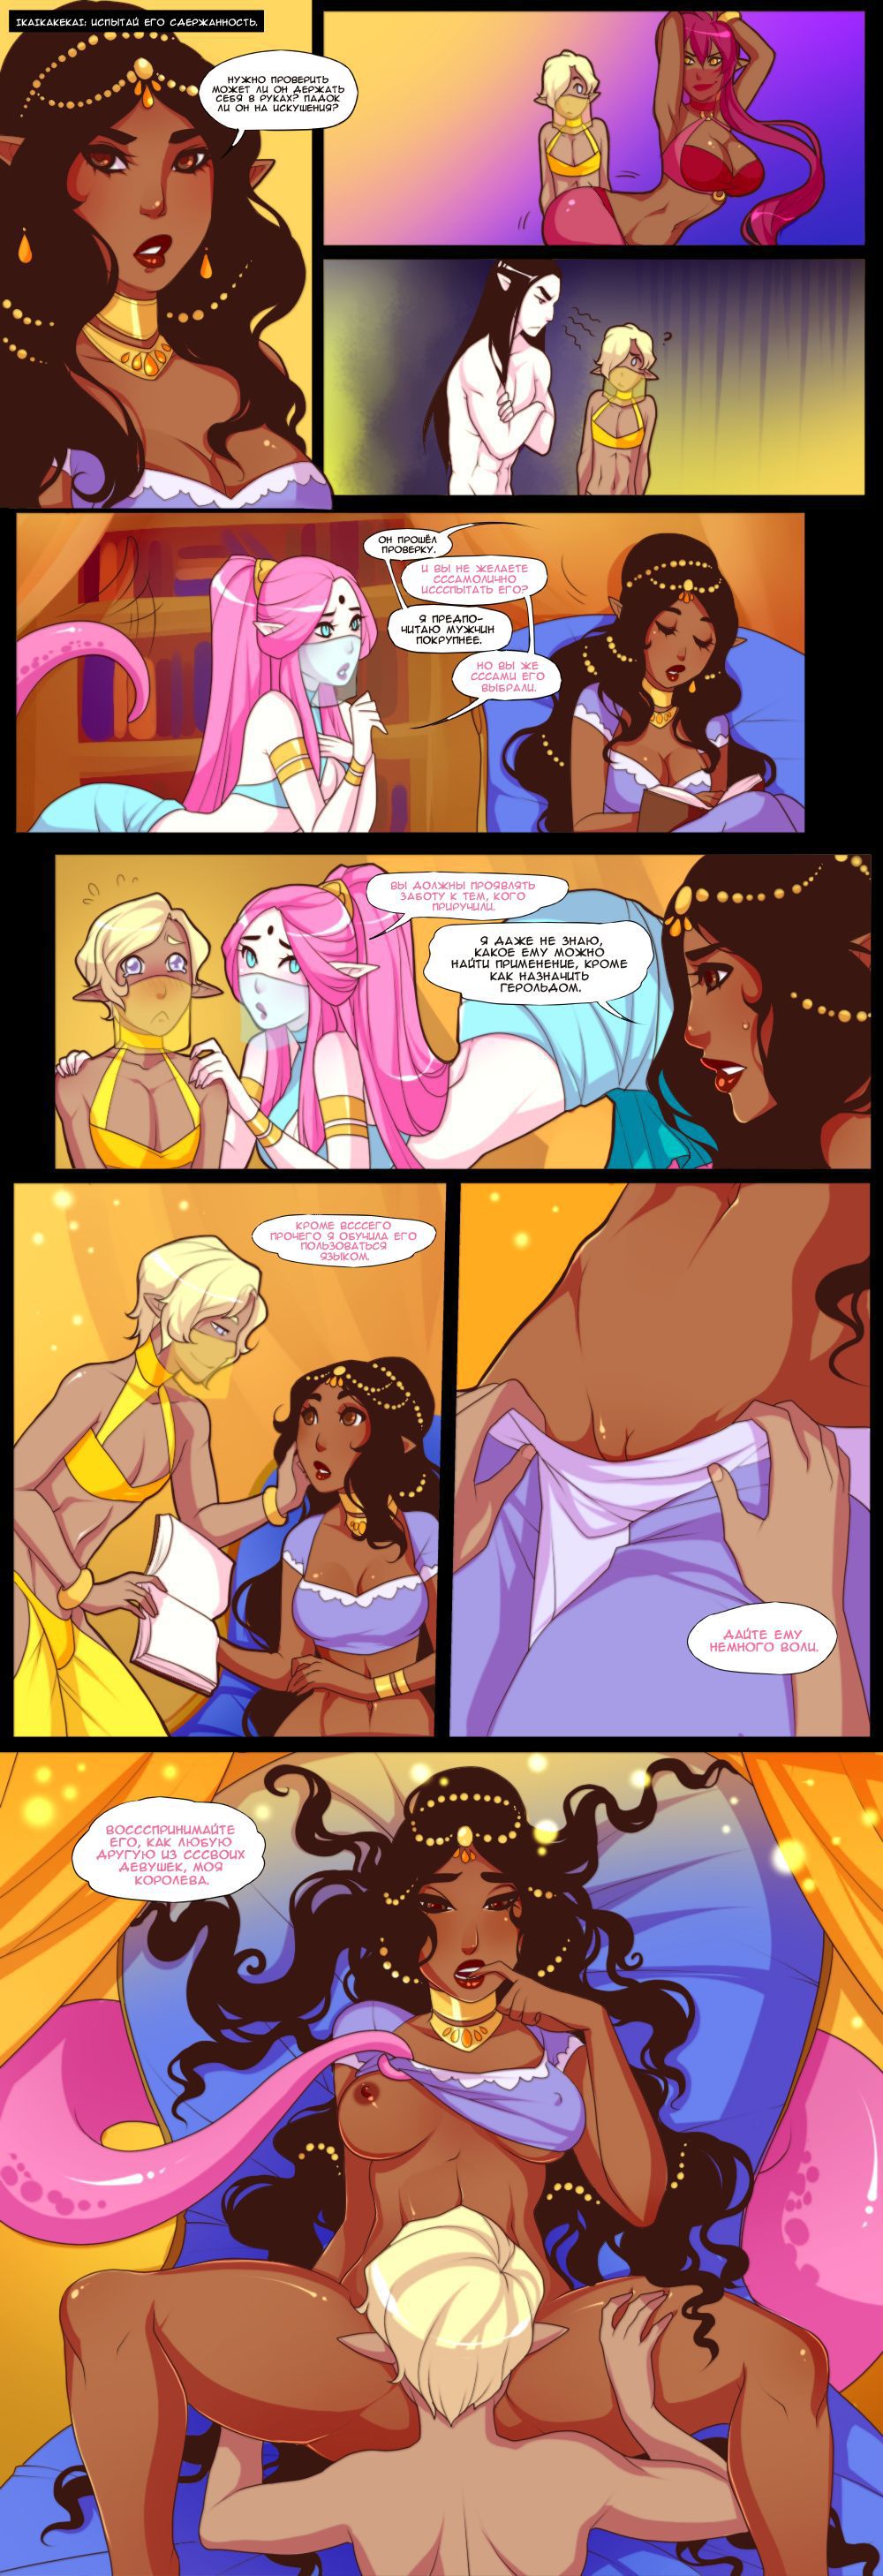 [Lunareth] Queen of Butts [Russian] (Ongoing) 37